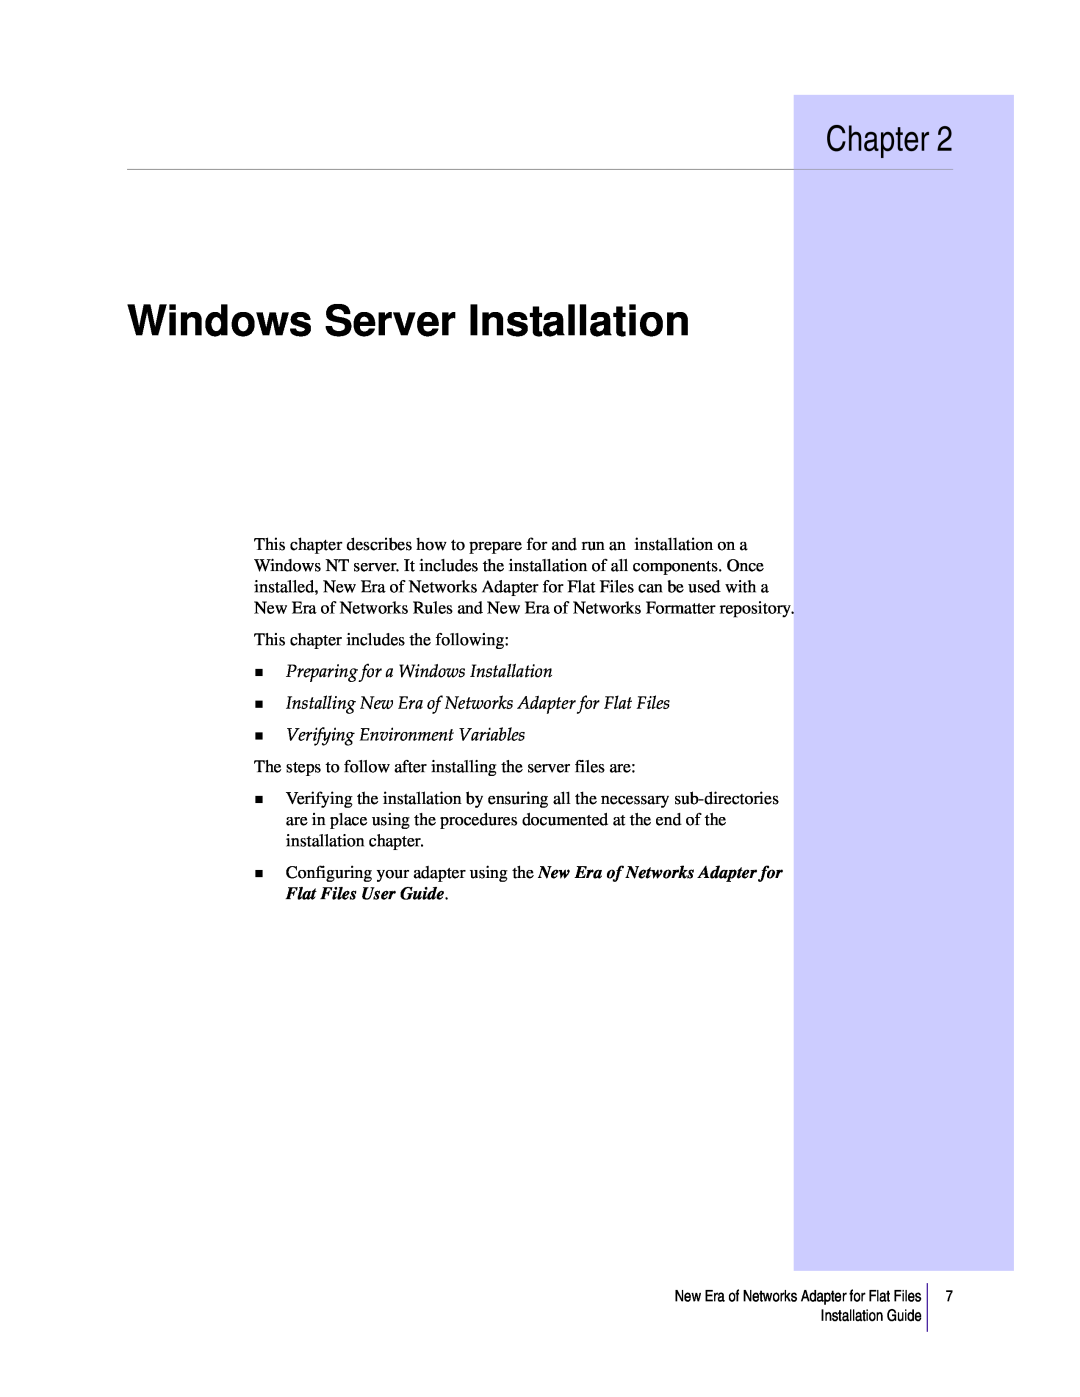 Sybase 3.8 Windows Server Installation, Preparing for a Windows Installation, Verifying Environment Variables, Chapter 